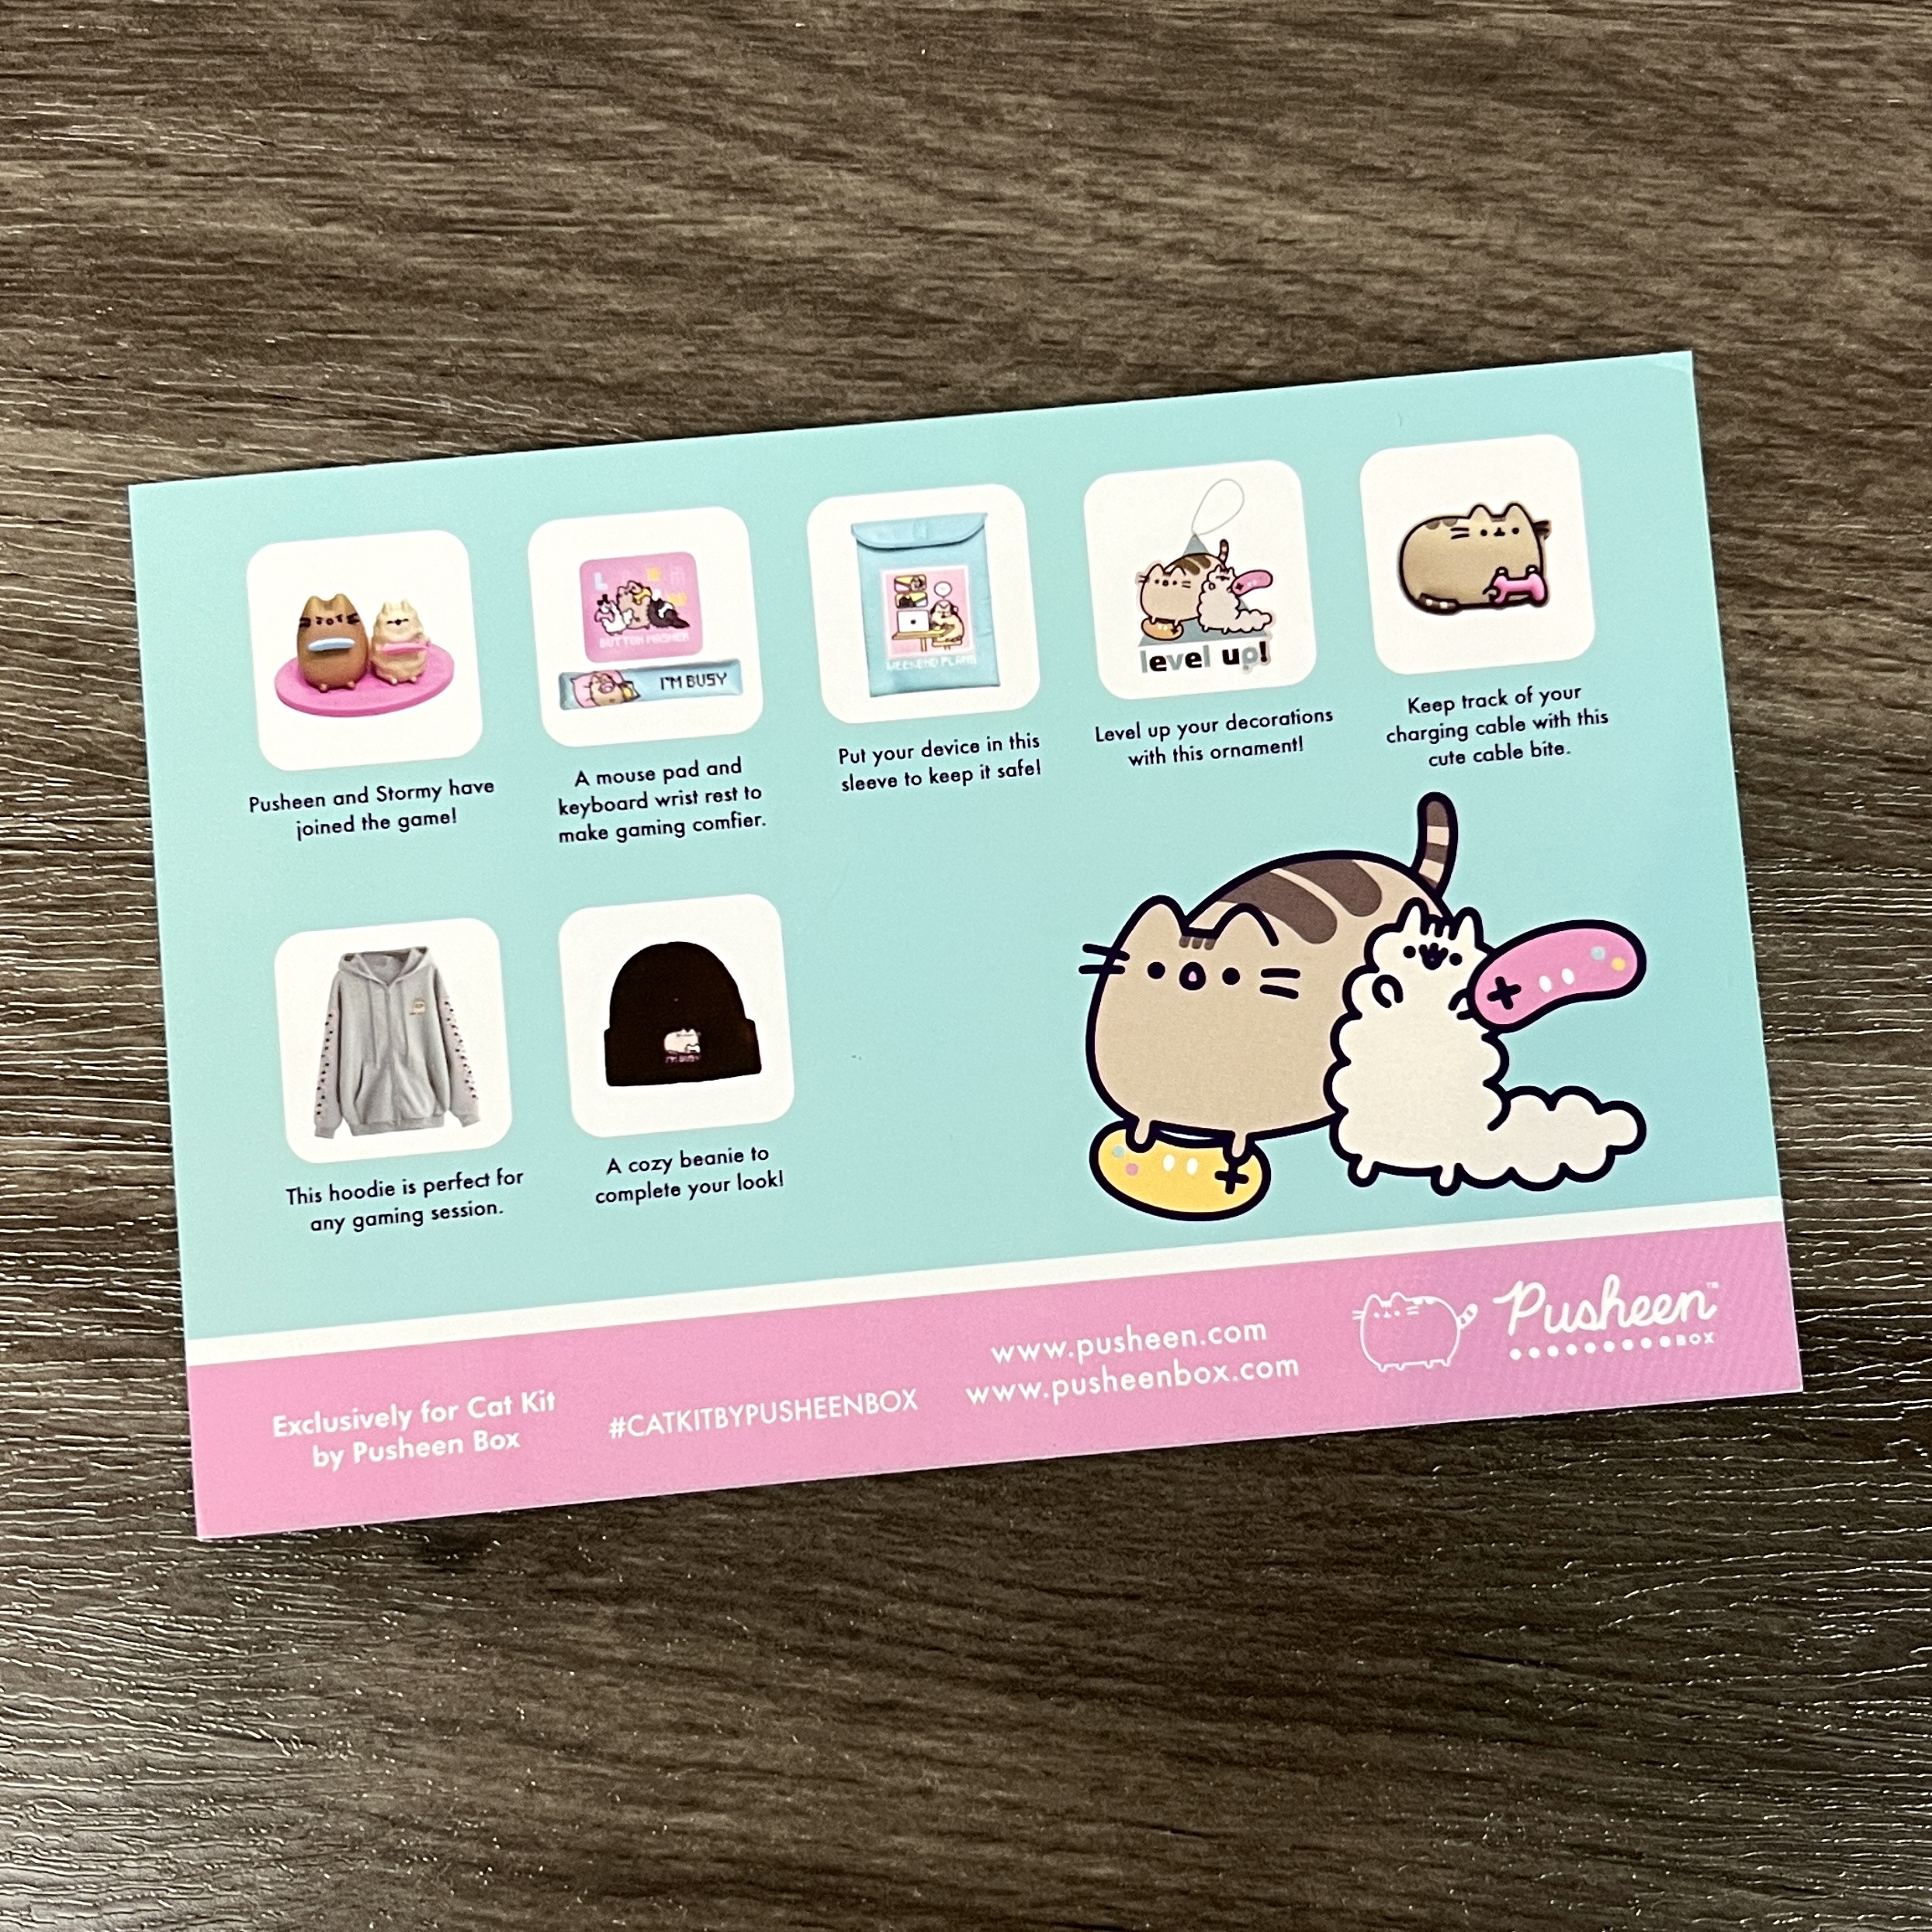 Back of Card for Pusheen Box Winter 2022